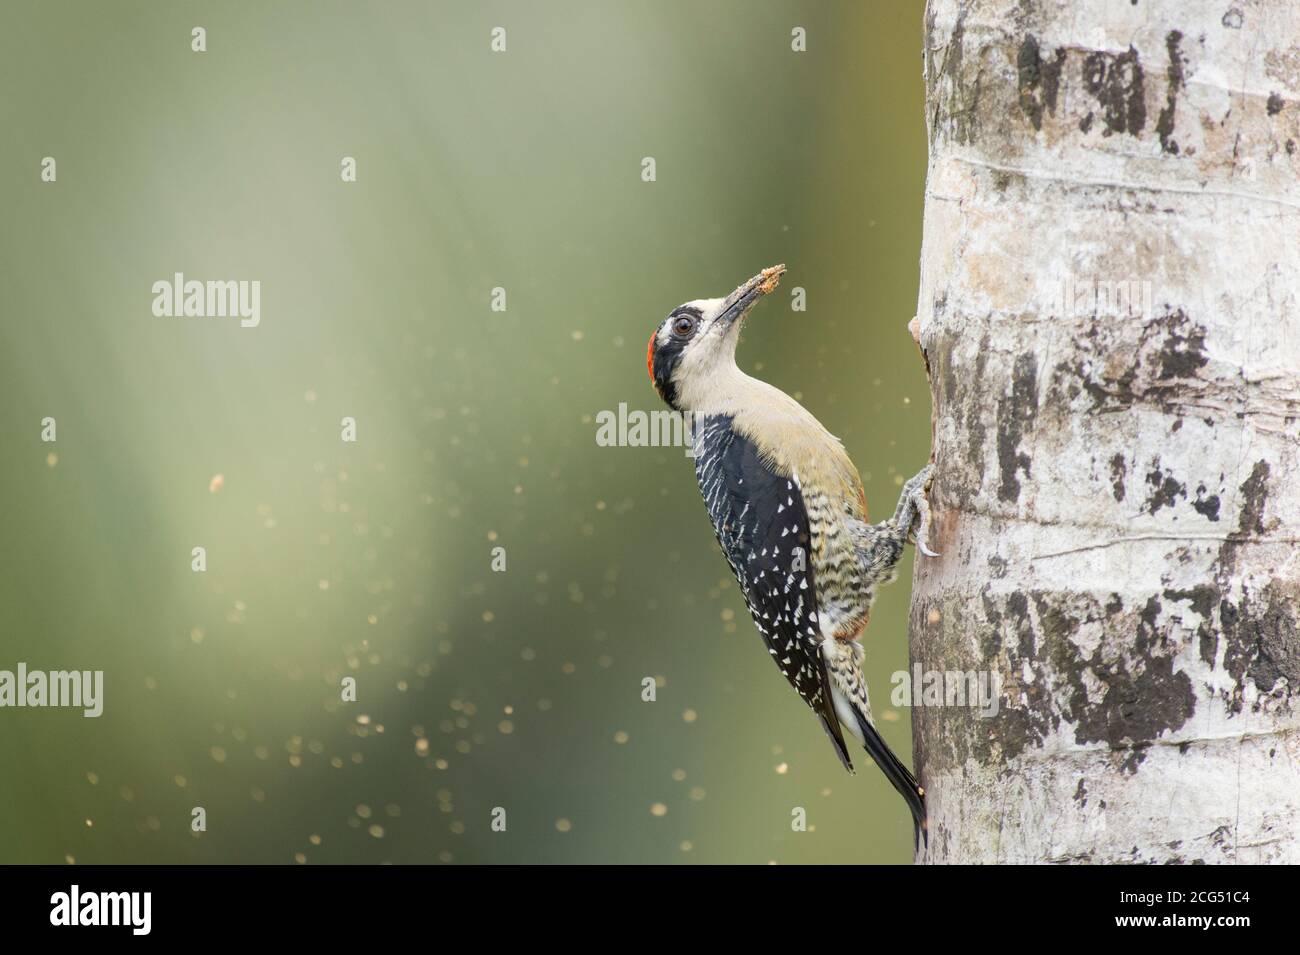 Black cheeked woodpecker excavating a nest in a tree in Costa Rica Stock Photo